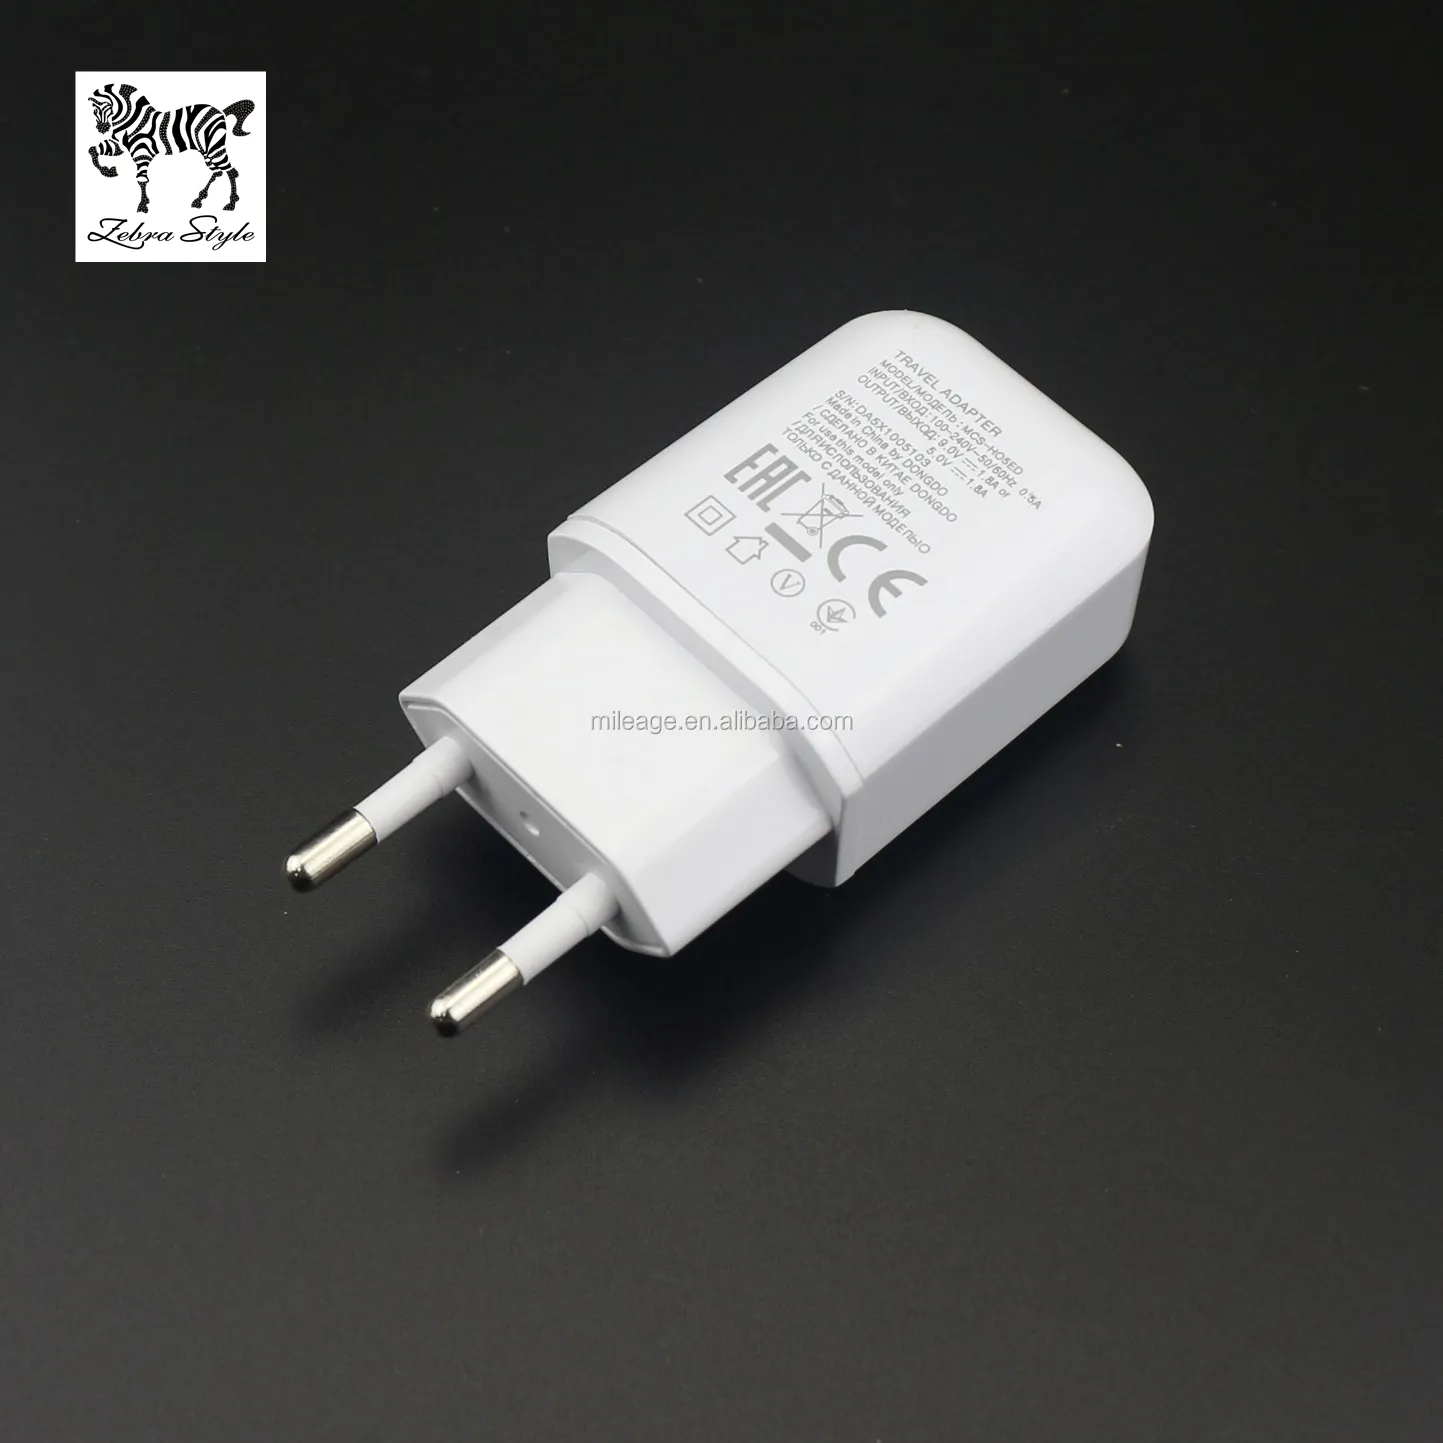 G5ためLG MObile Phone Travel Wall Charger Original MCS-H05ED 9V 1.8A 5V 1.8A Charger Adapter